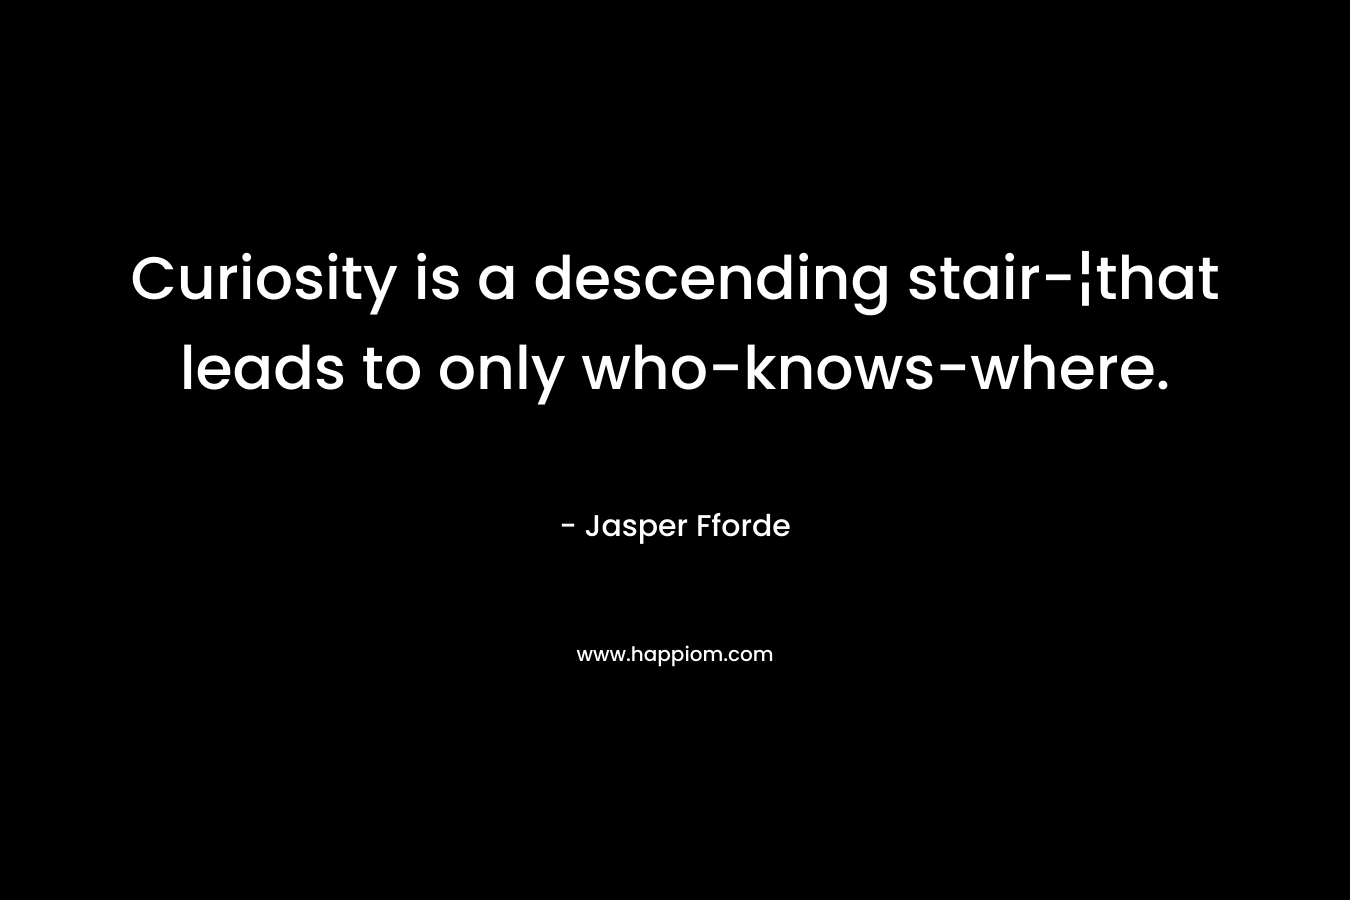 Curiosity is a descending stair-¦that leads to only who-knows-where.